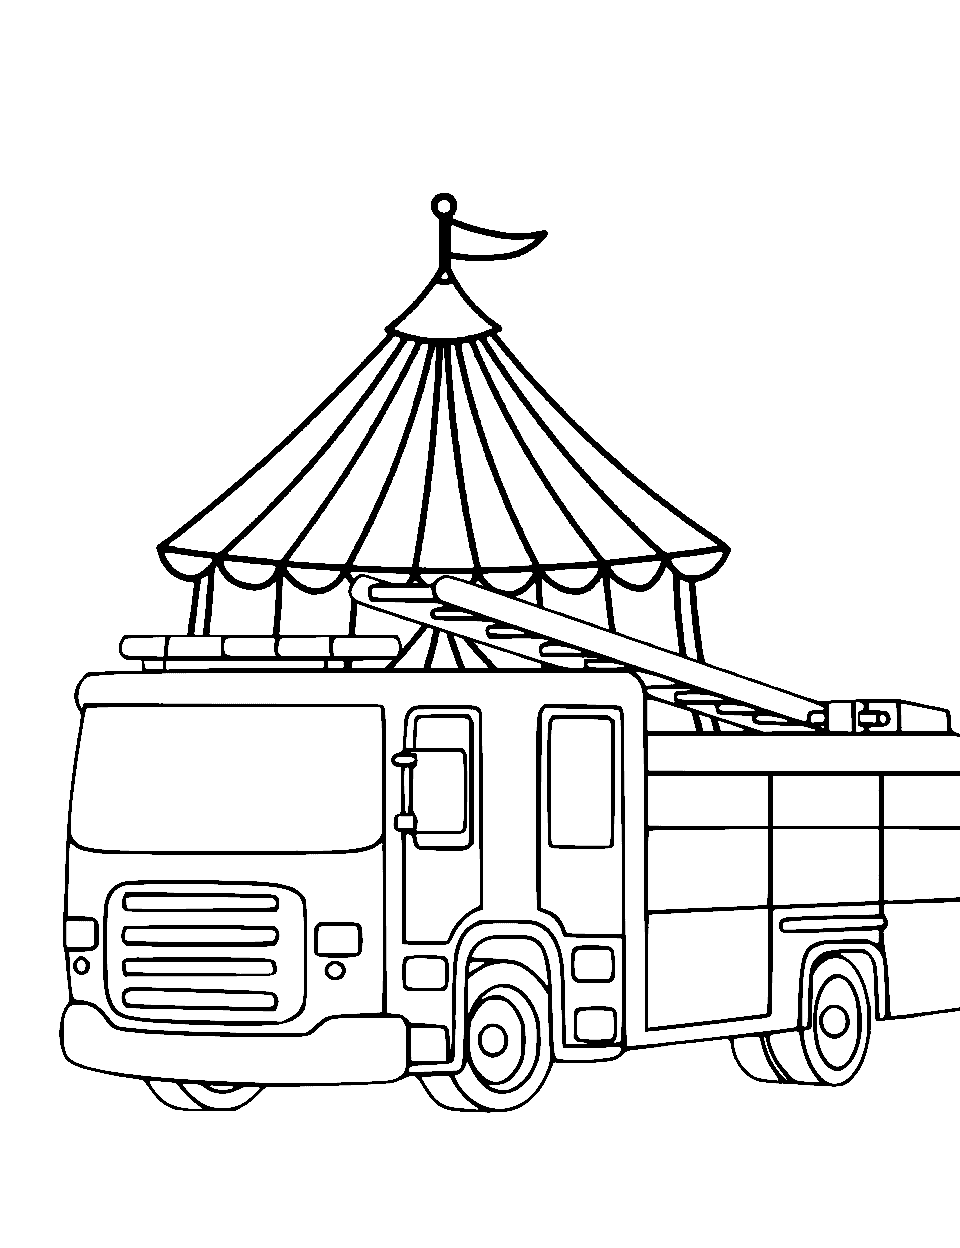 Fire Truck at the Circus Coloring Page - A fire truck parked at a circus, with a tent in the background.